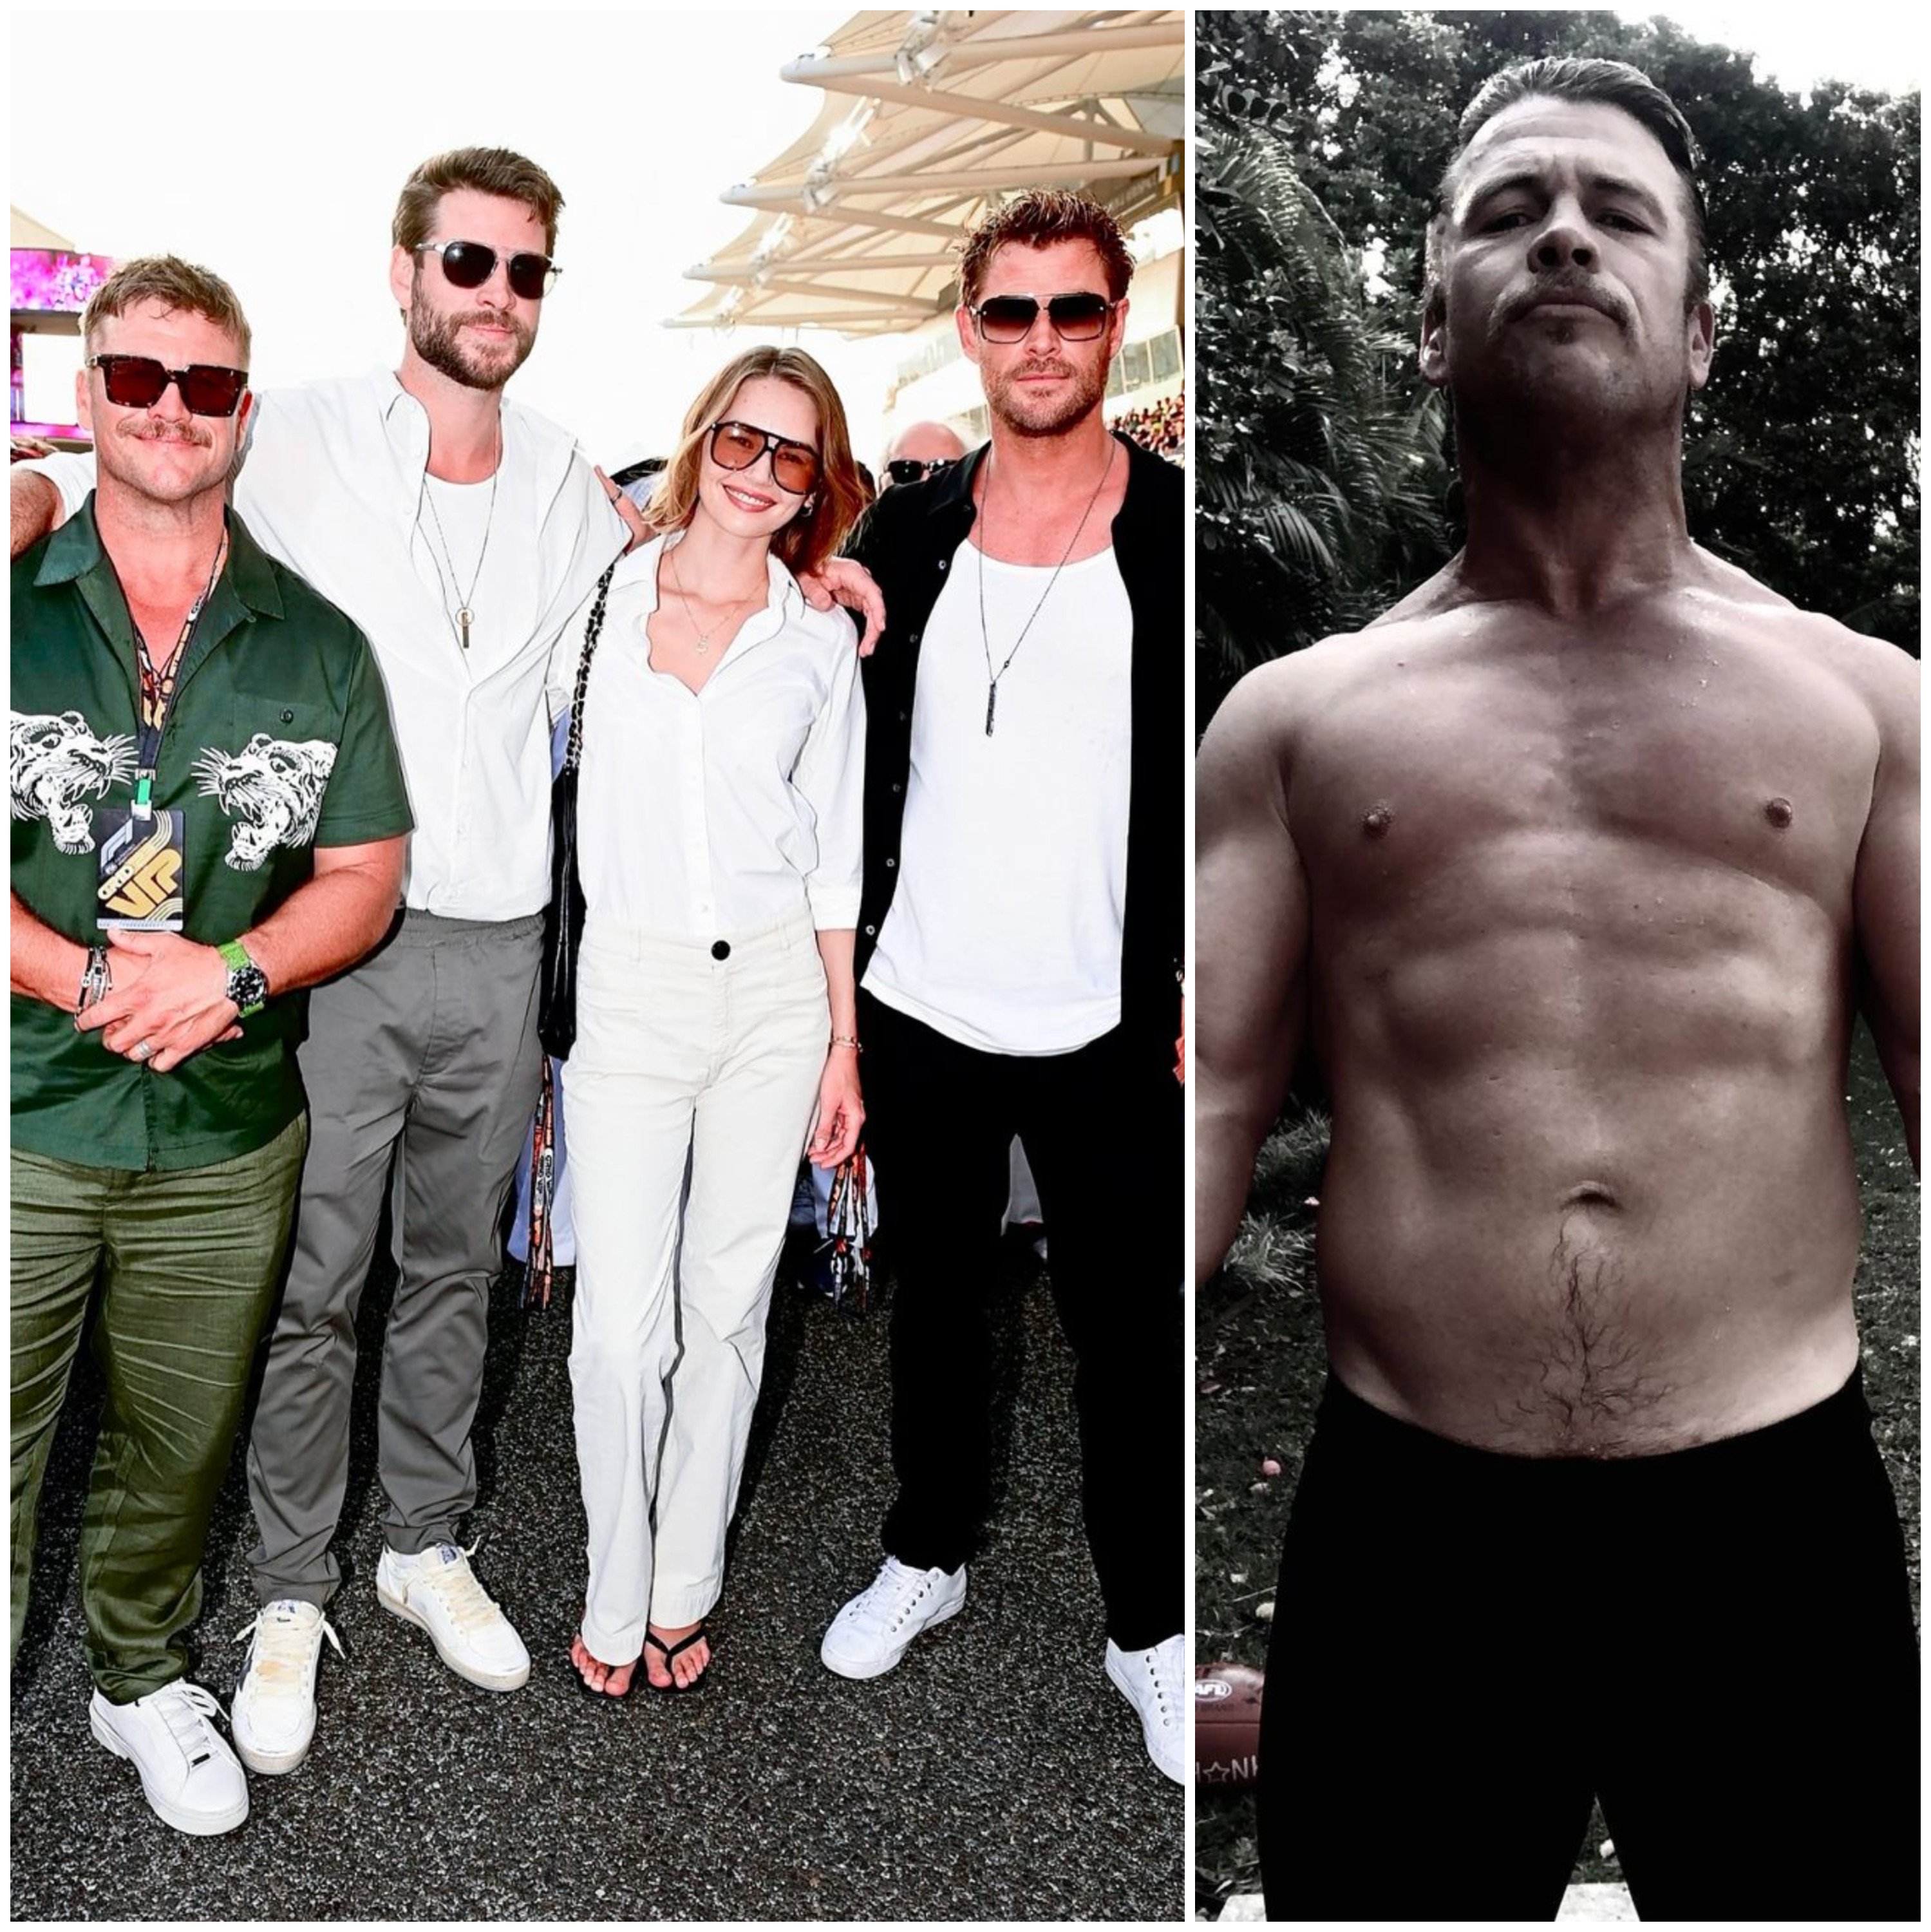 Luke Hemsworth may not be as well known as his younger brothers Chris and Liam, but he’s still a regular fixture in Hollywood films and TV shows. Photos: @hemsworthsfeed, @hemsworthluke/Instagram